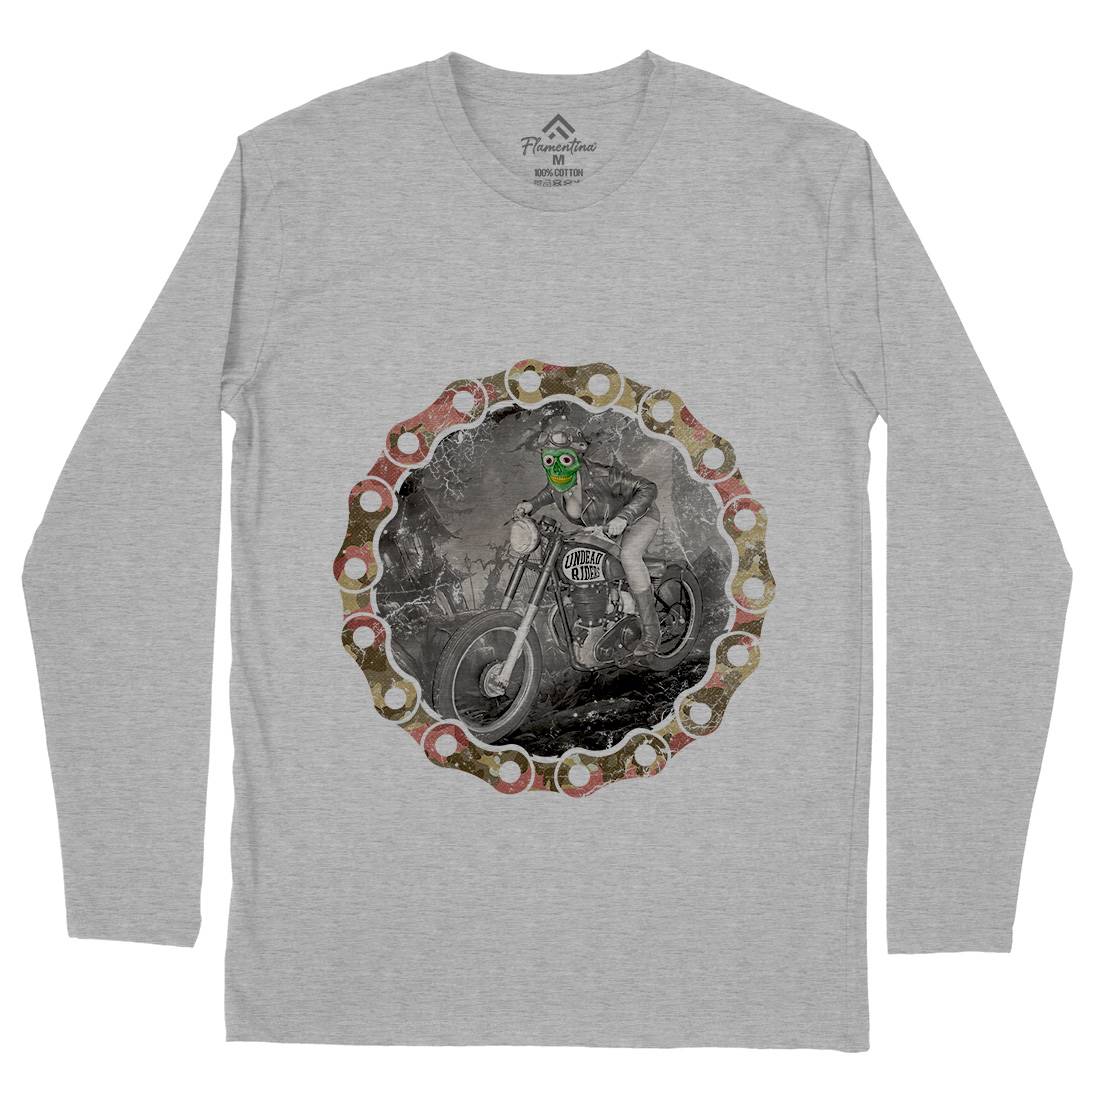 Undead Riders Mens Long Sleeve T-Shirt Motorcycles A937